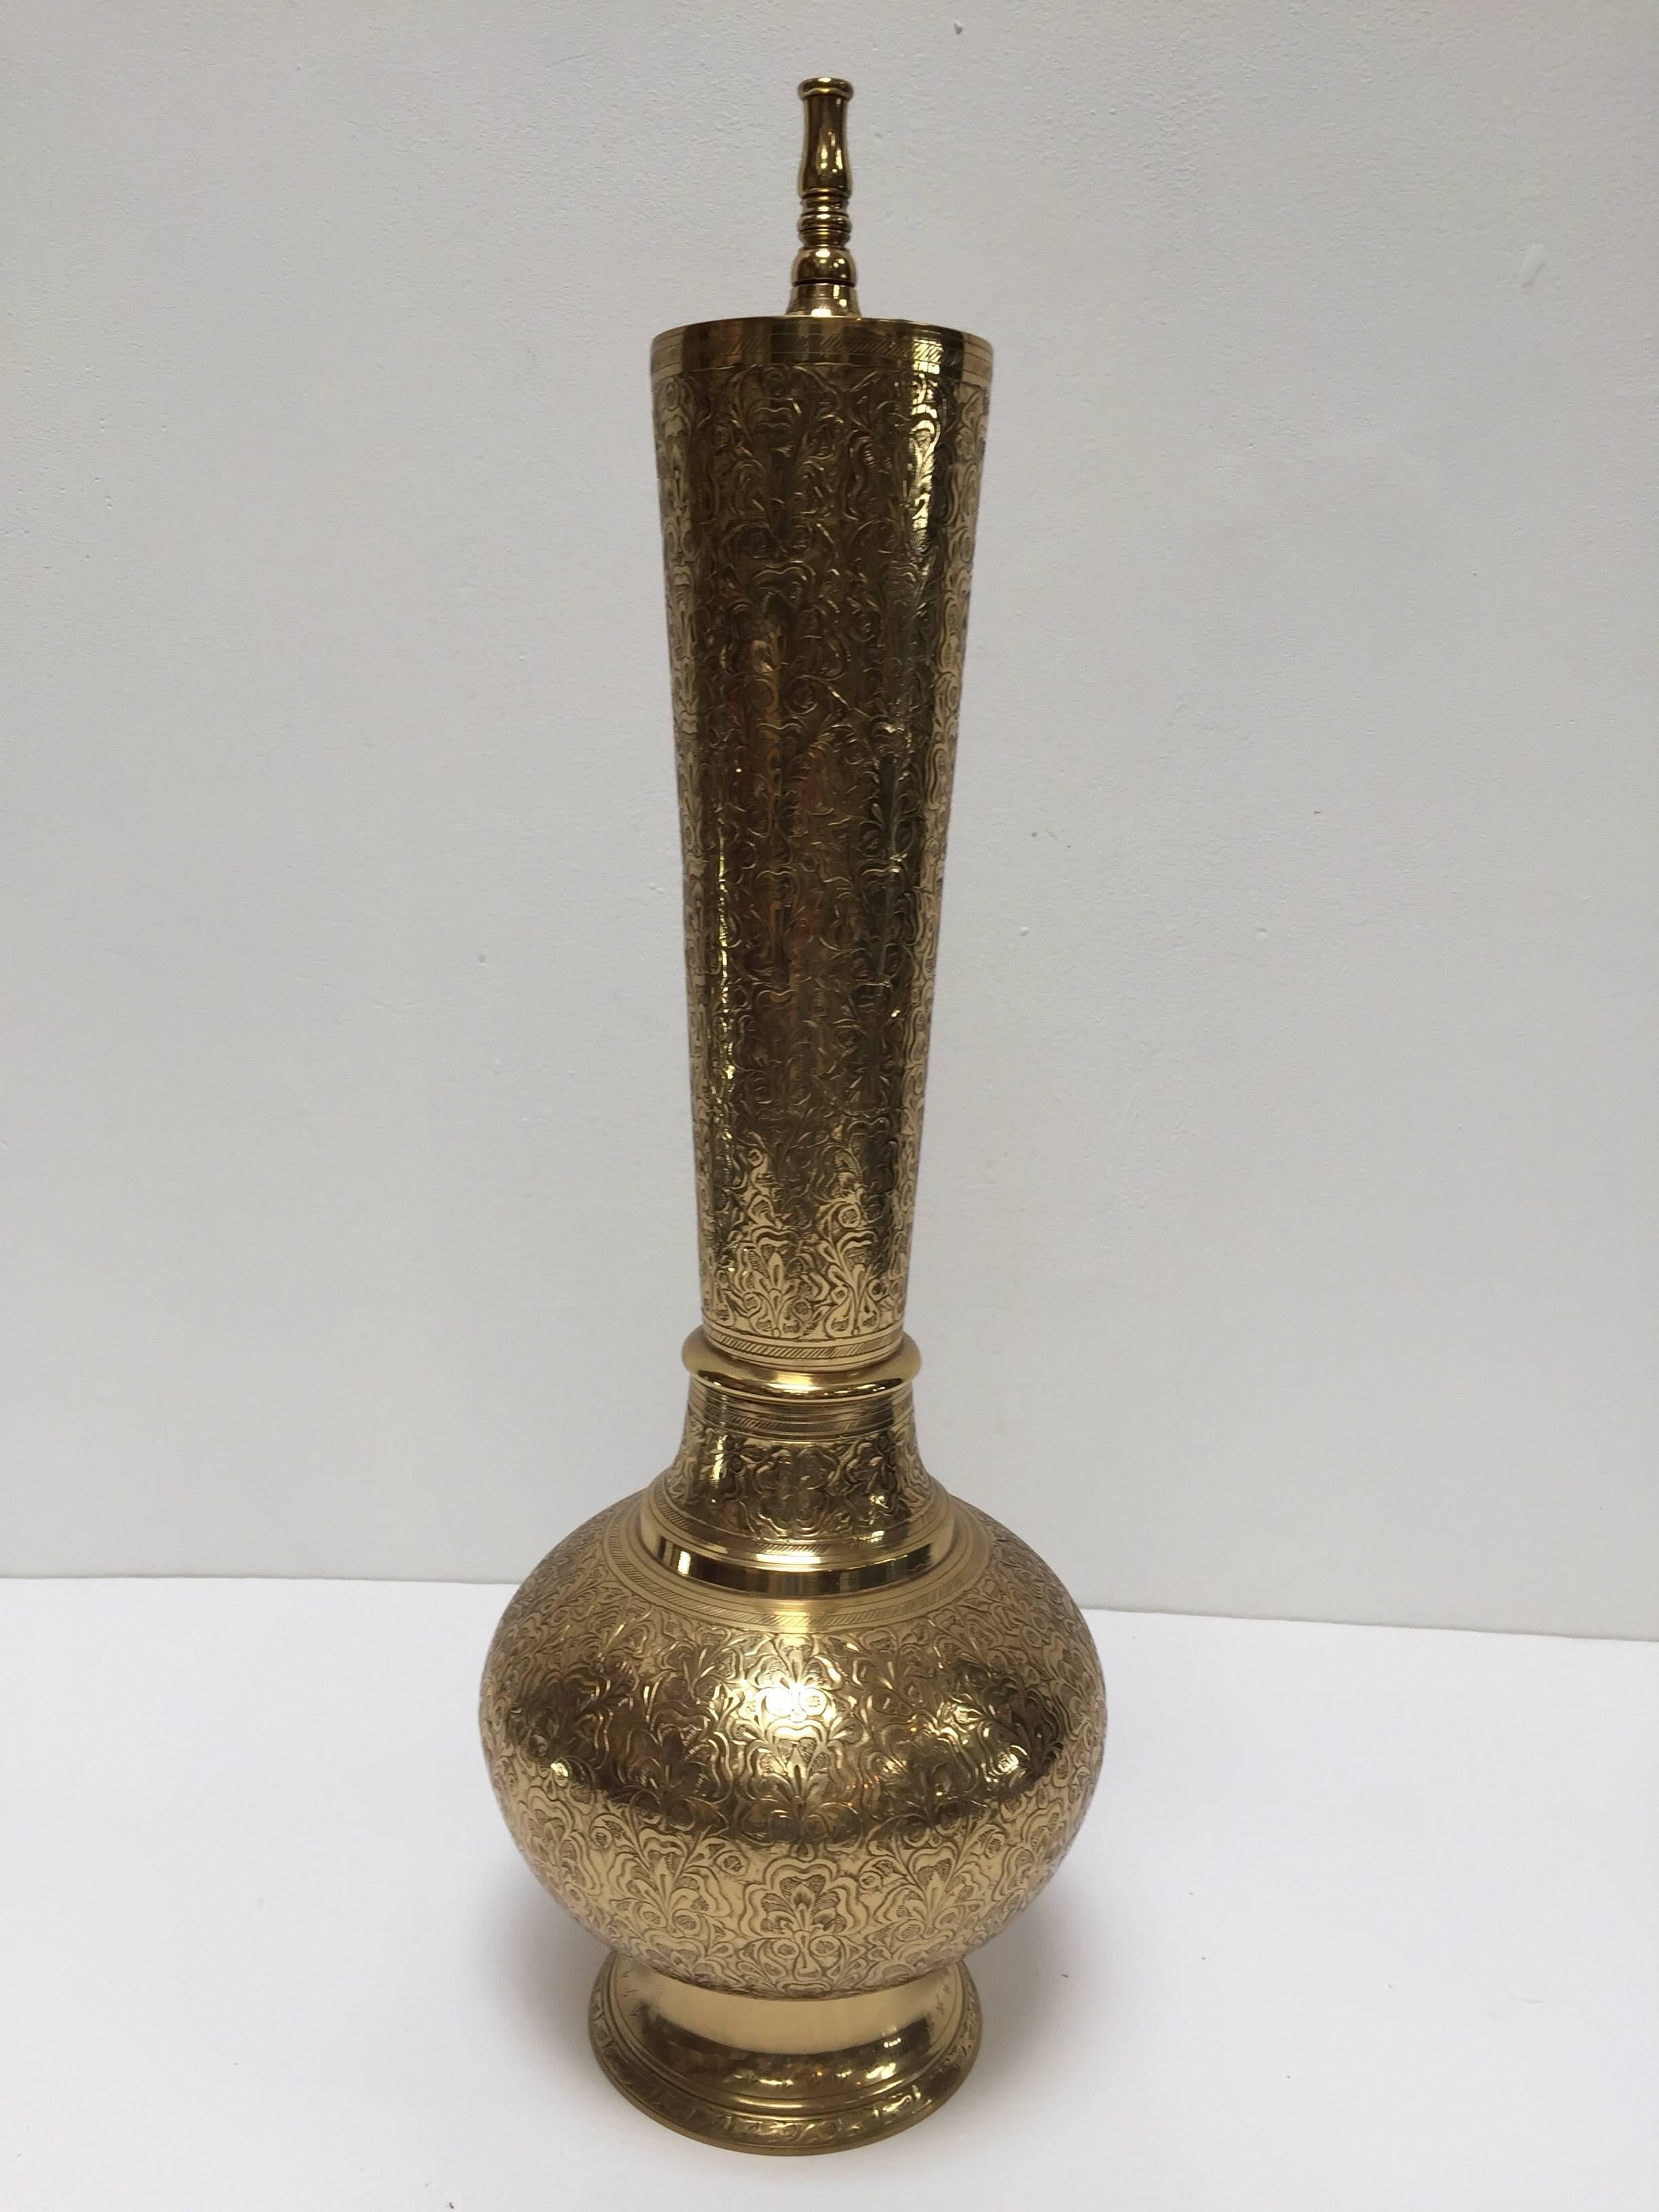 Elegant tall Moorish polished brass incense burner made into a lamp base.
Intricately carved chiseled polished brass onion- form with long neck on a circular base.
Could easily be rewired and converted to a table lamp, holes are already there for